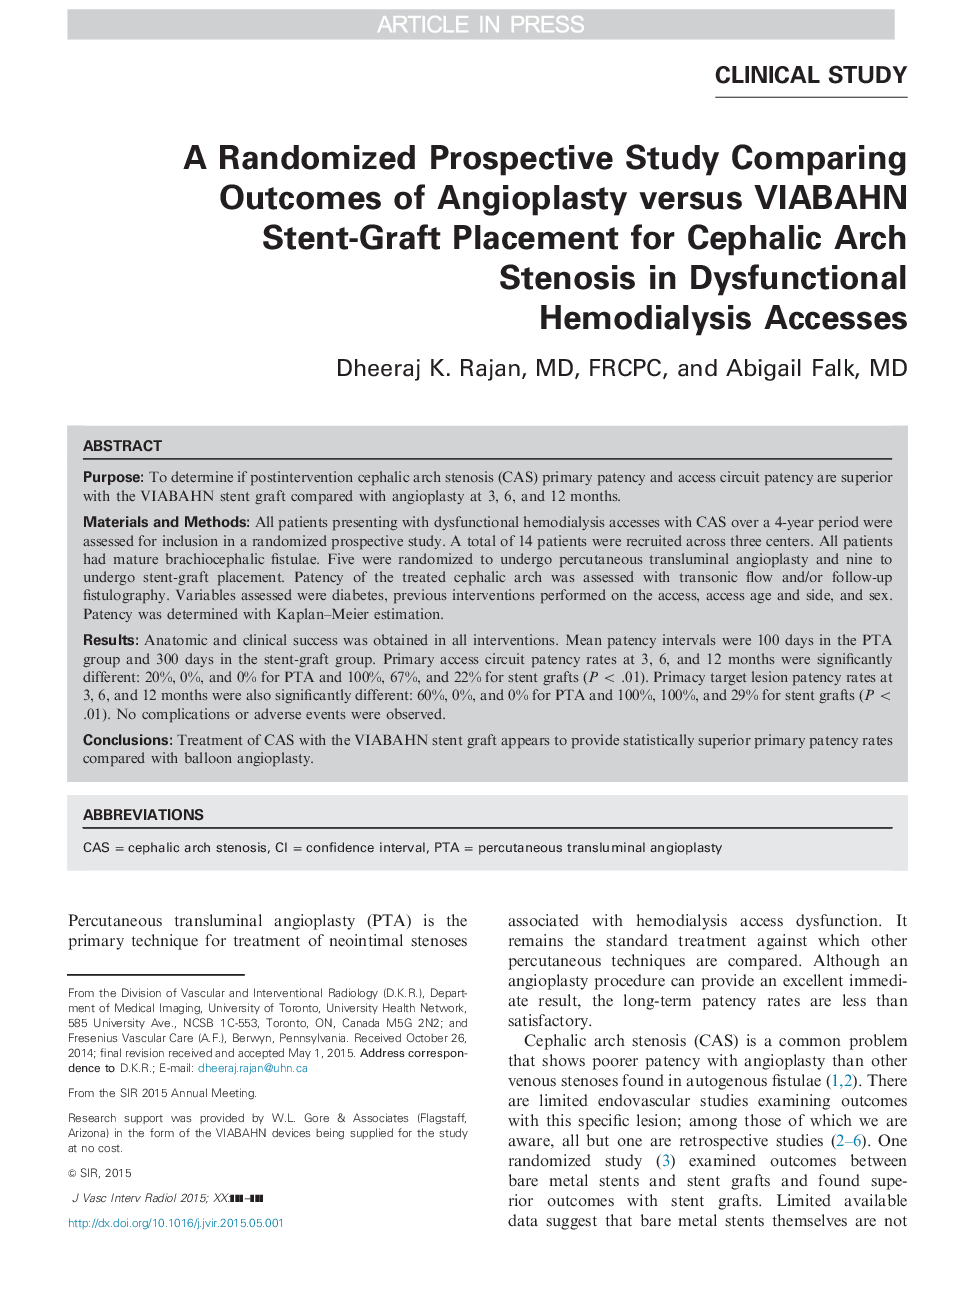 A Randomized Prospective Study Comparing Outcomes of Angioplasty versus VIABAHN Stent-Graft Placement for Cephalic Arch Stenosis in Dysfunctional Hemodialysis Accesses